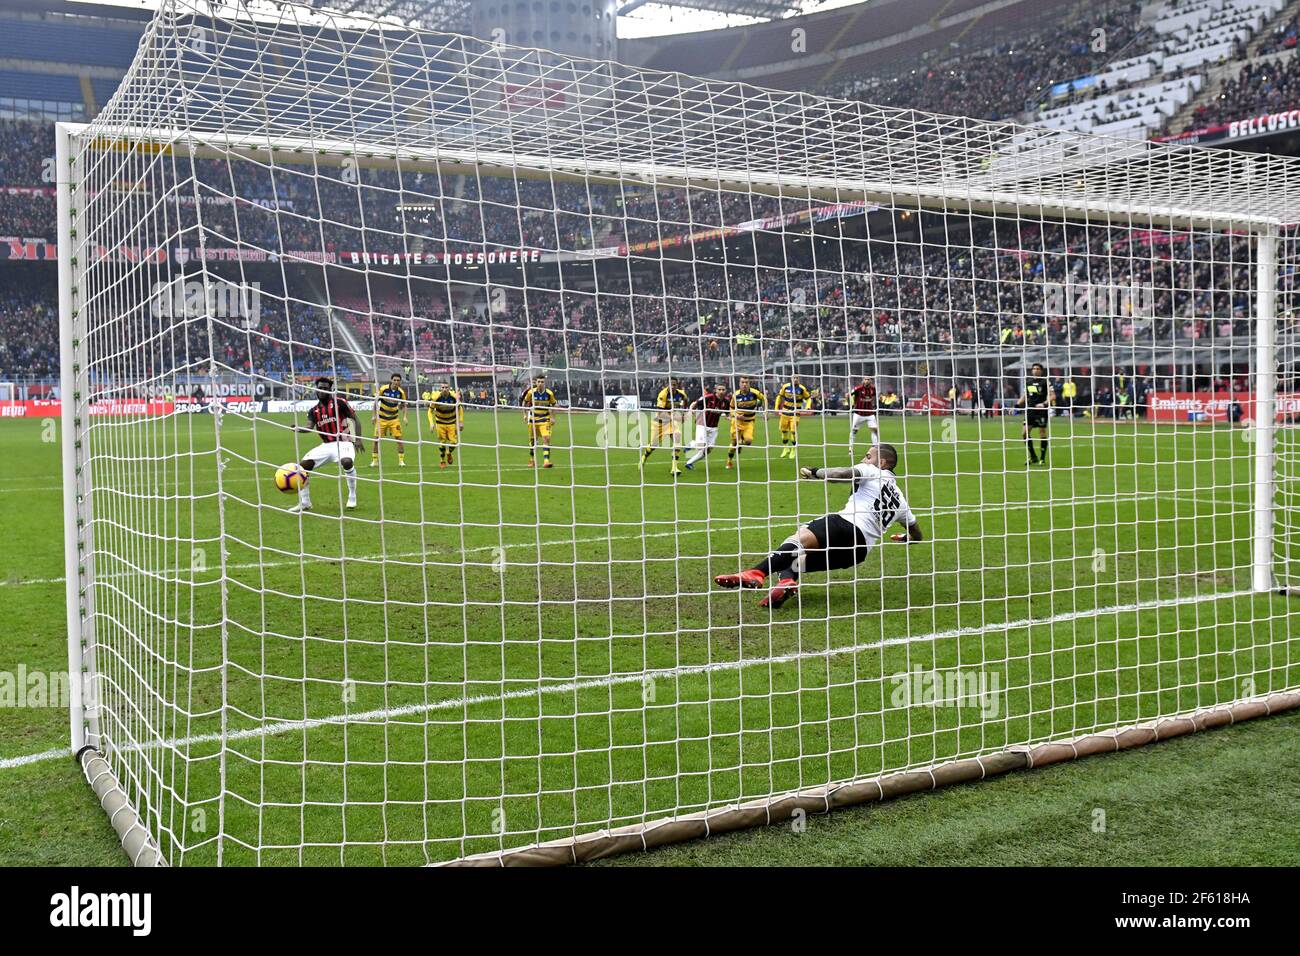 Penalty kick view from behind the goal post, during the Italian Serie A football match at the San Siro stadium. Milan, Italy. Stock Photo